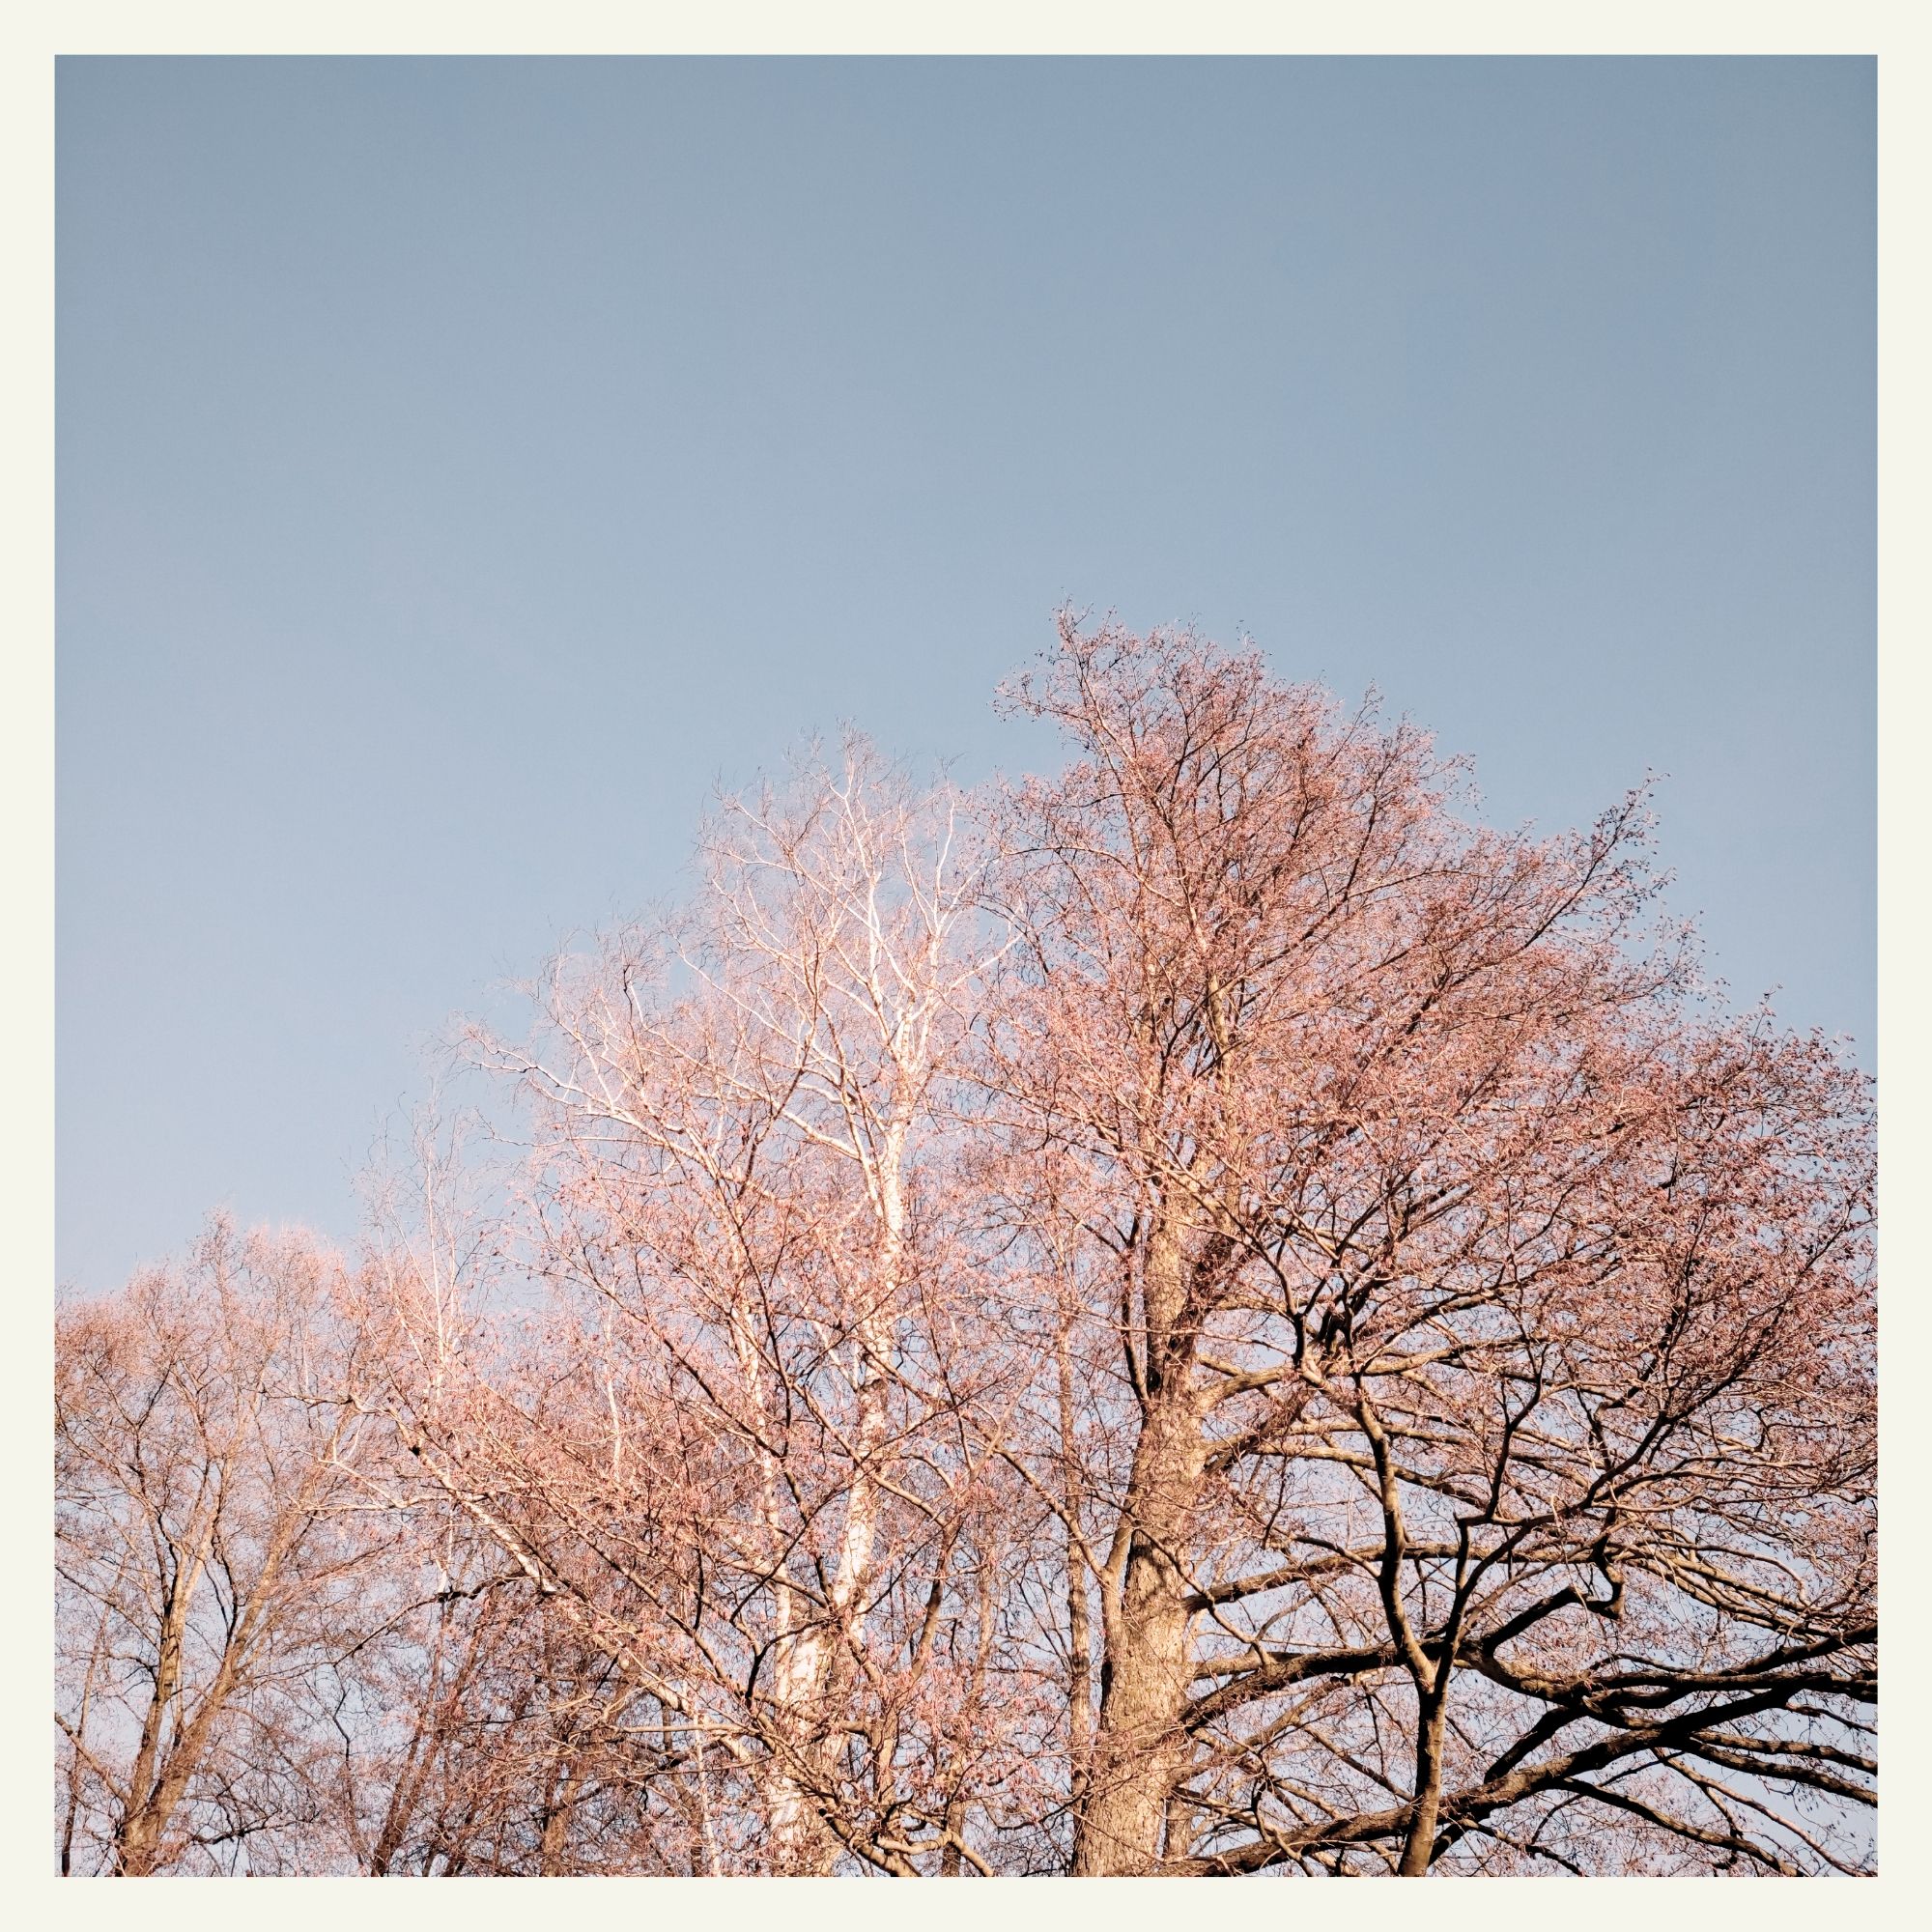 Pale trees in front of blue sky.